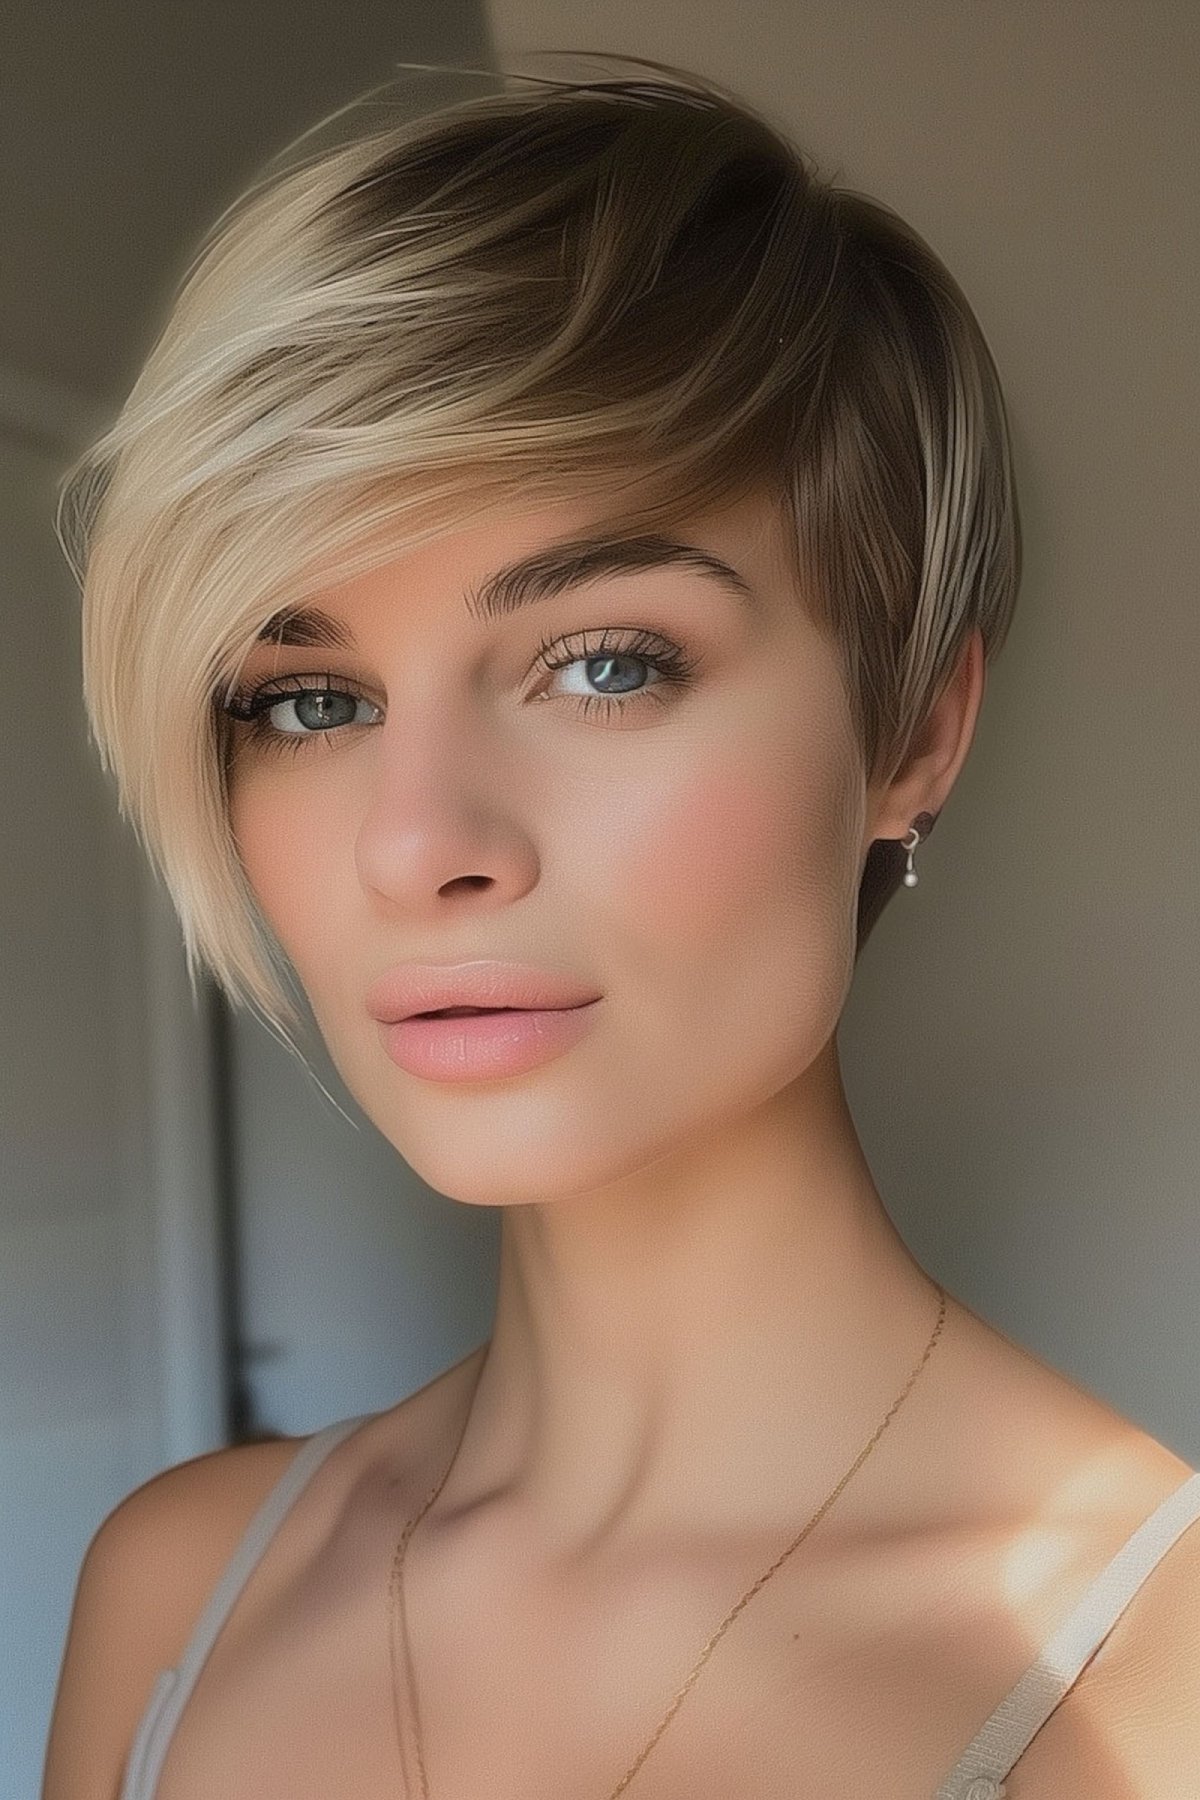 Stylish pixie cut with long side-swept bangs, ideal for square-faced women